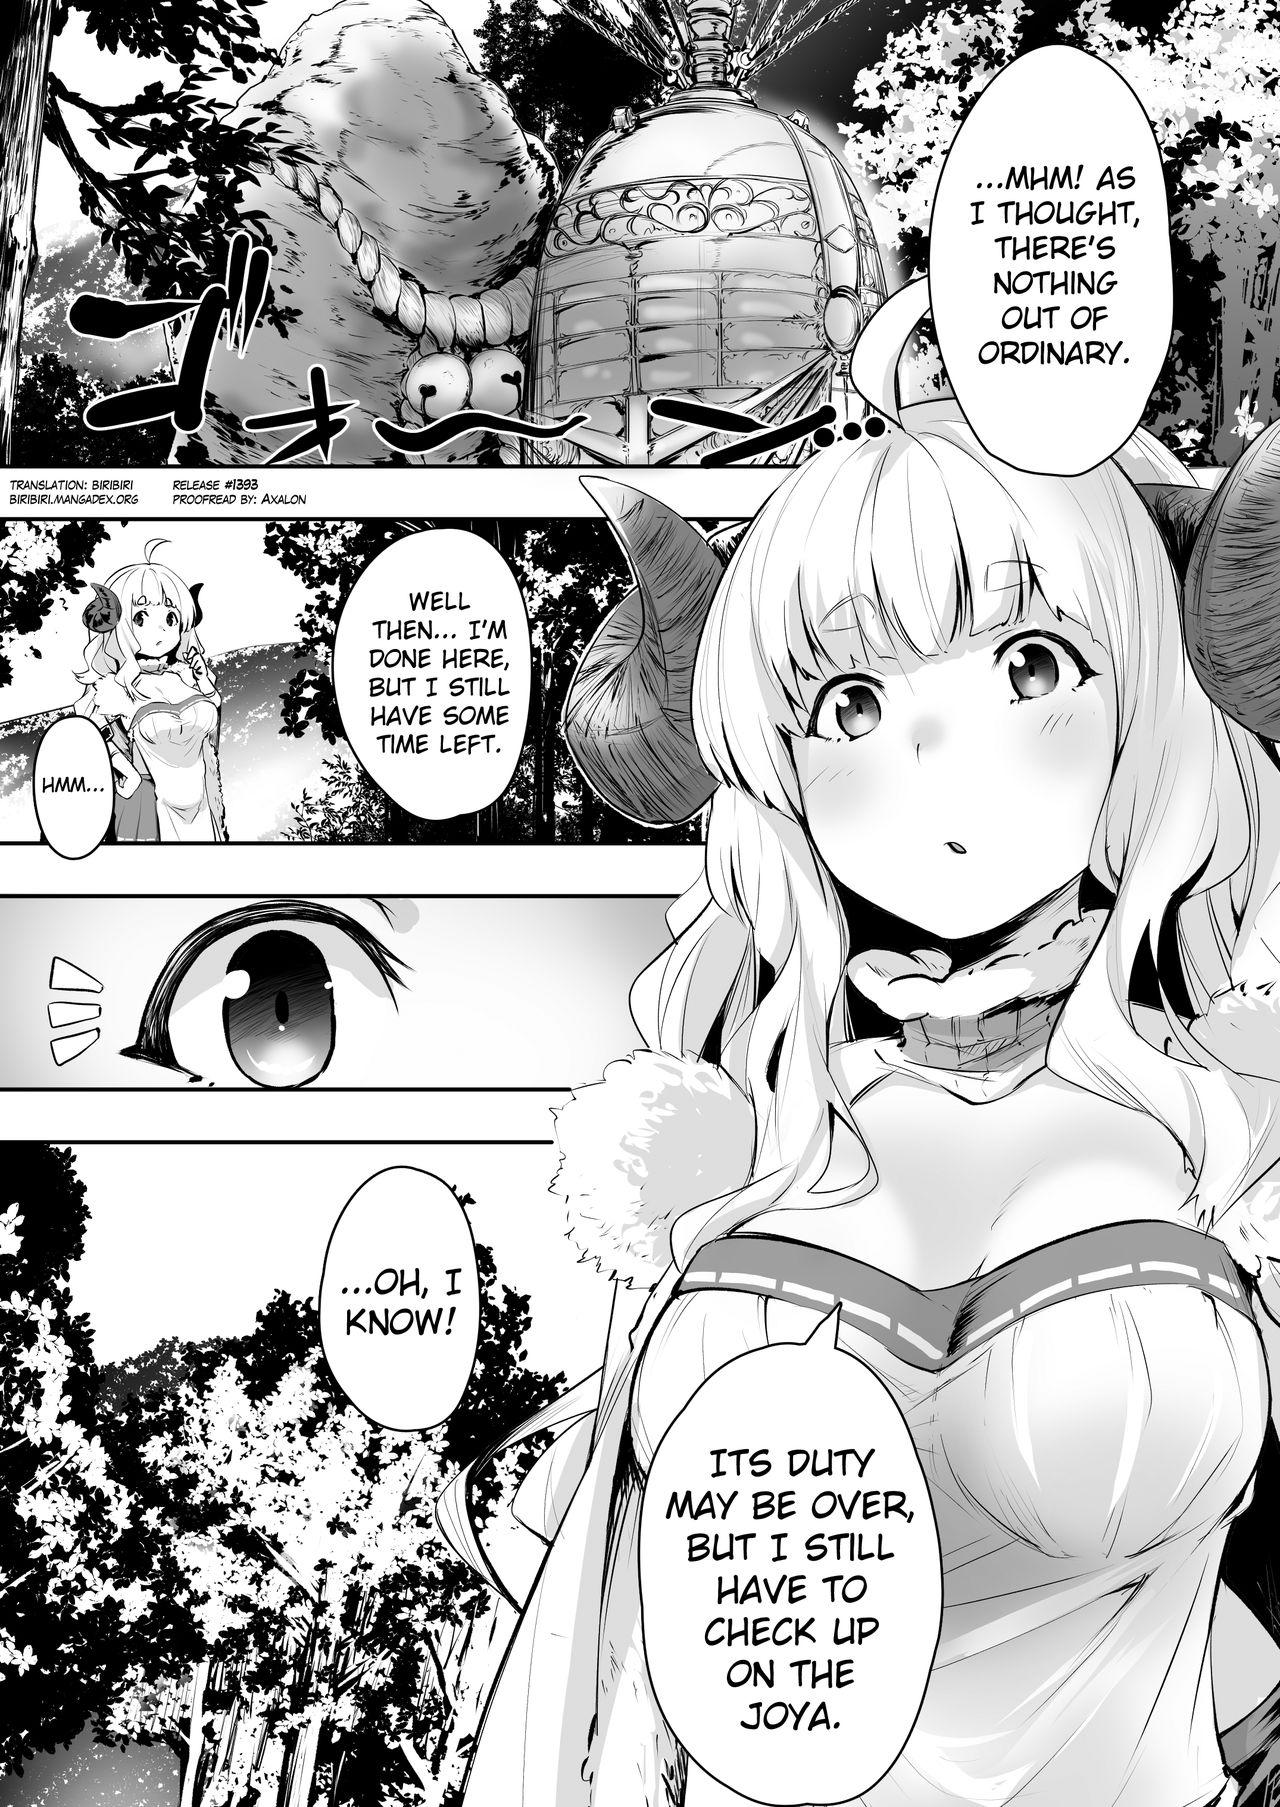 Bang Bros Bonnou Aftercare | Aftercare of Carnal Desires - Granblue fantasy Stockings - Page 2